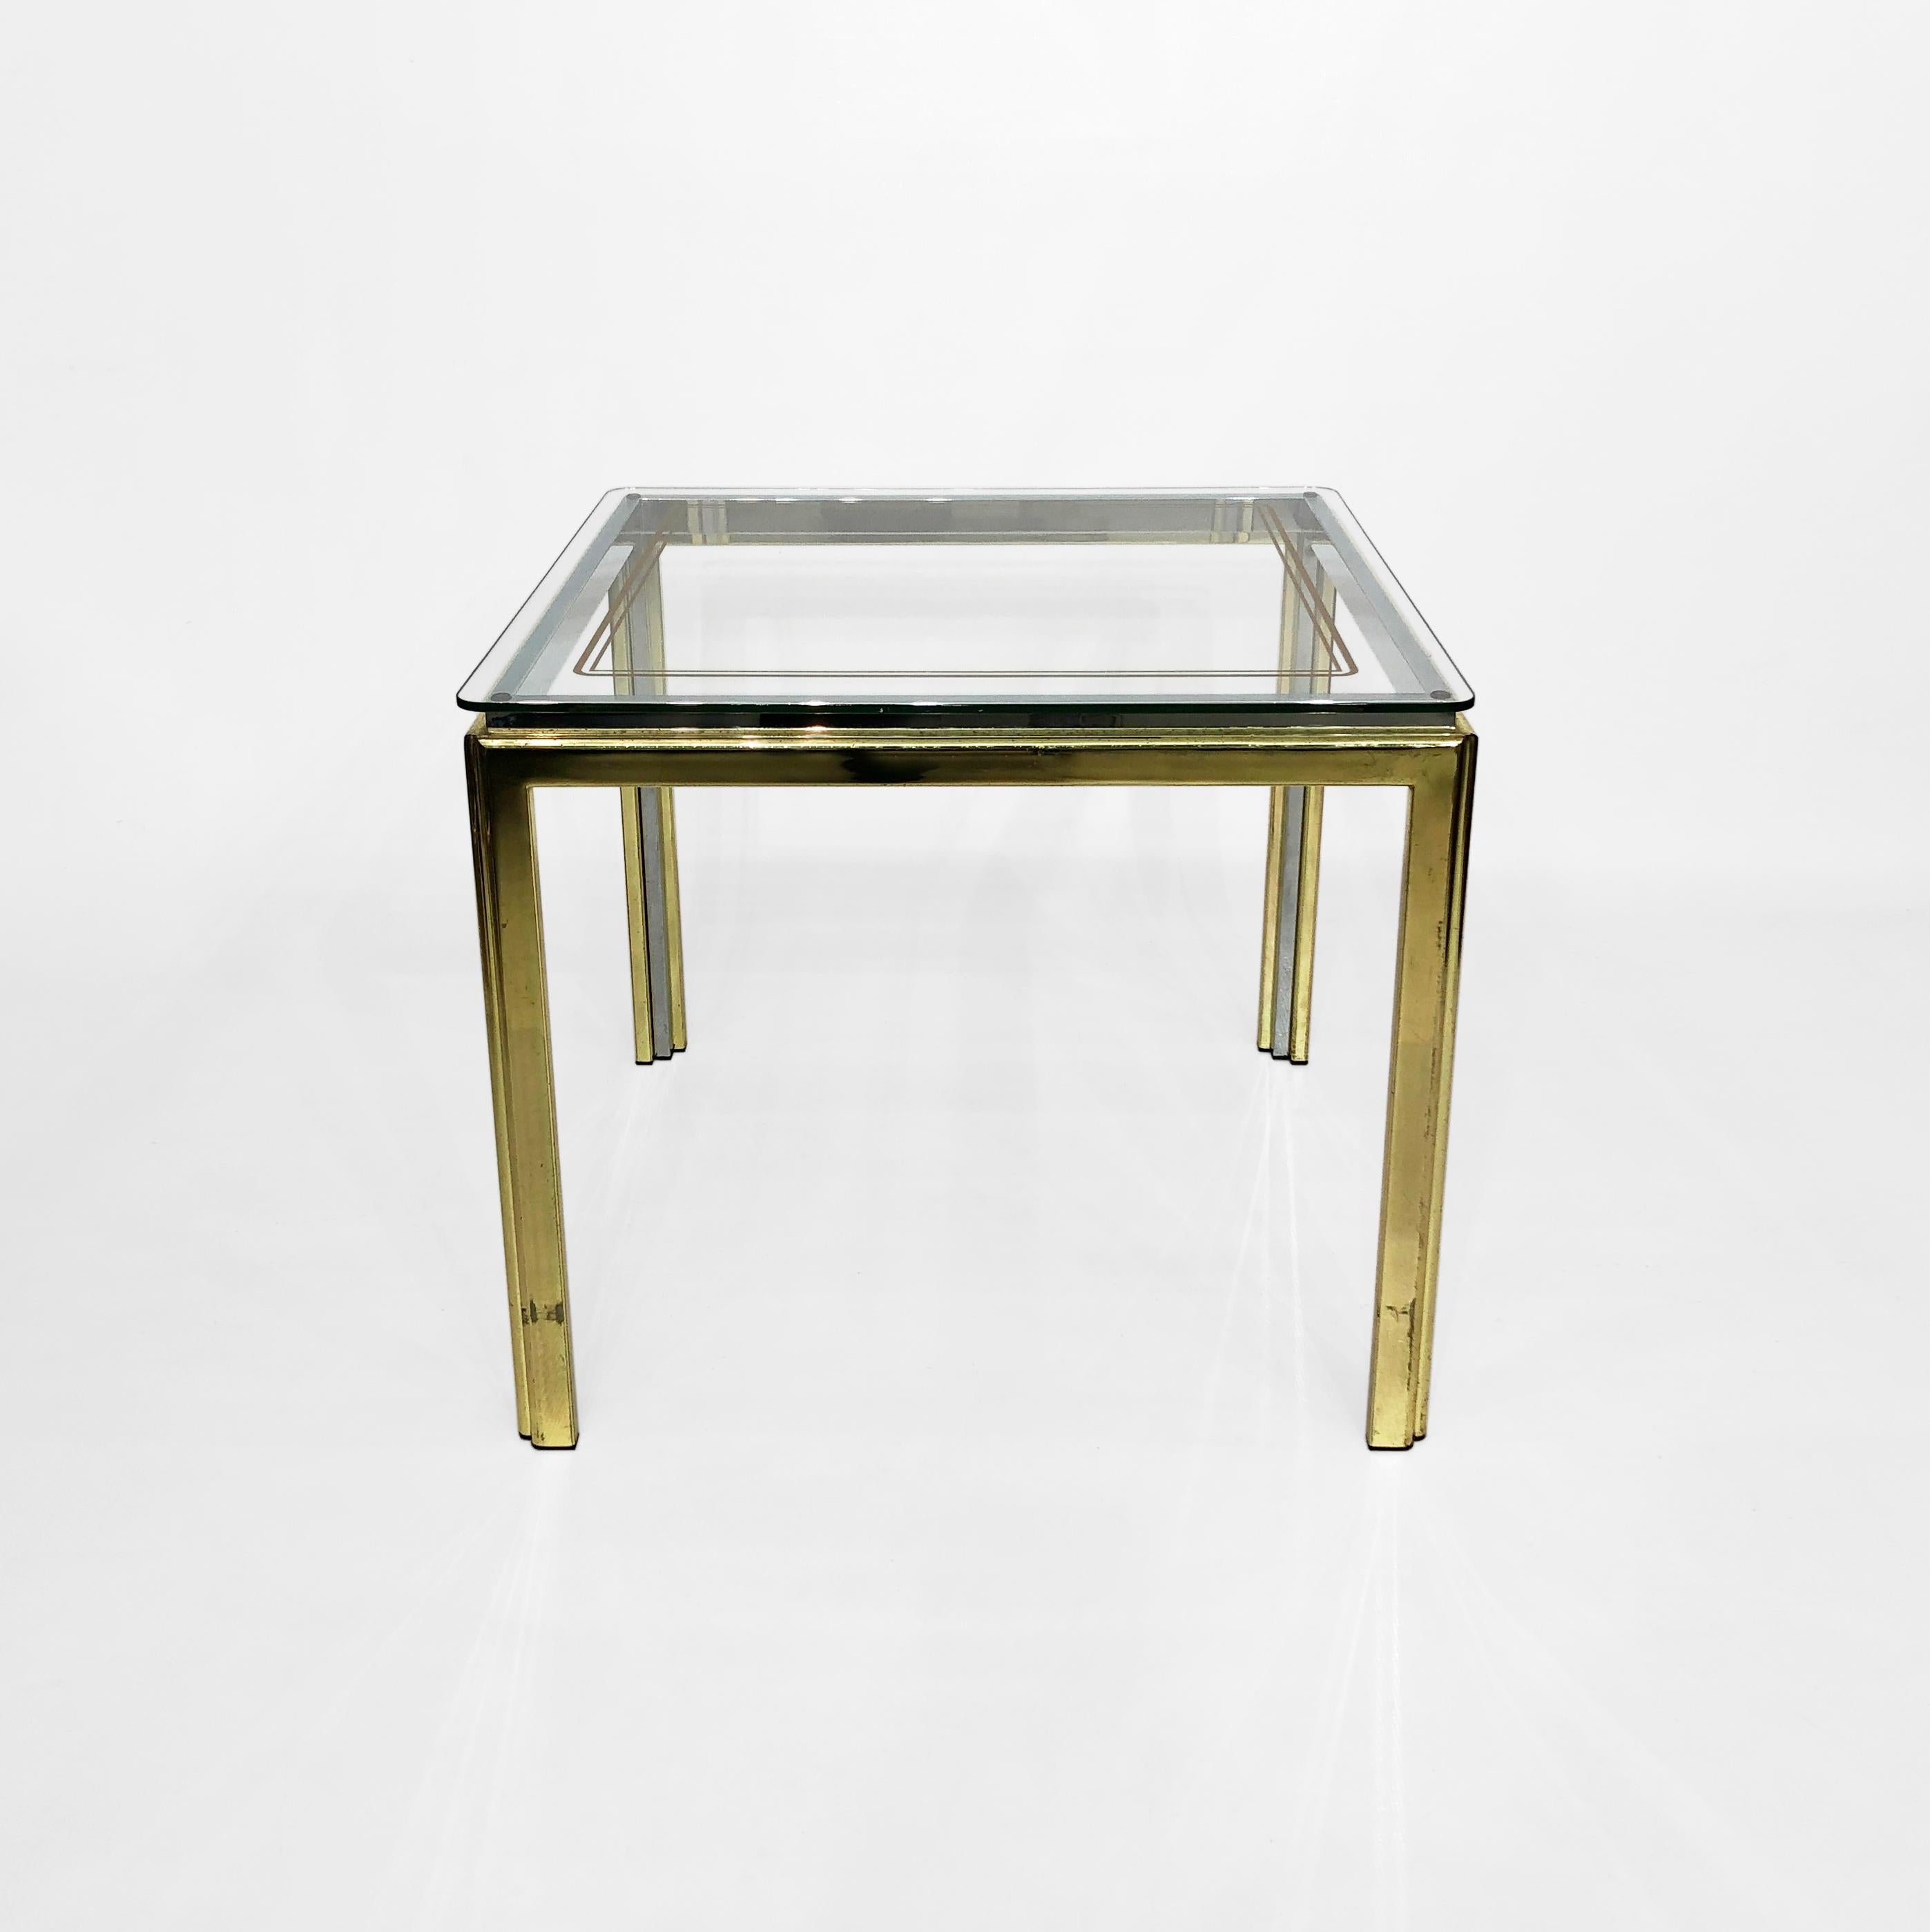 Pair of Side Brass Glass Chrome Tables Renato Zevi Style Hollywood Regency #2 In Good Condition For Sale In London, GB